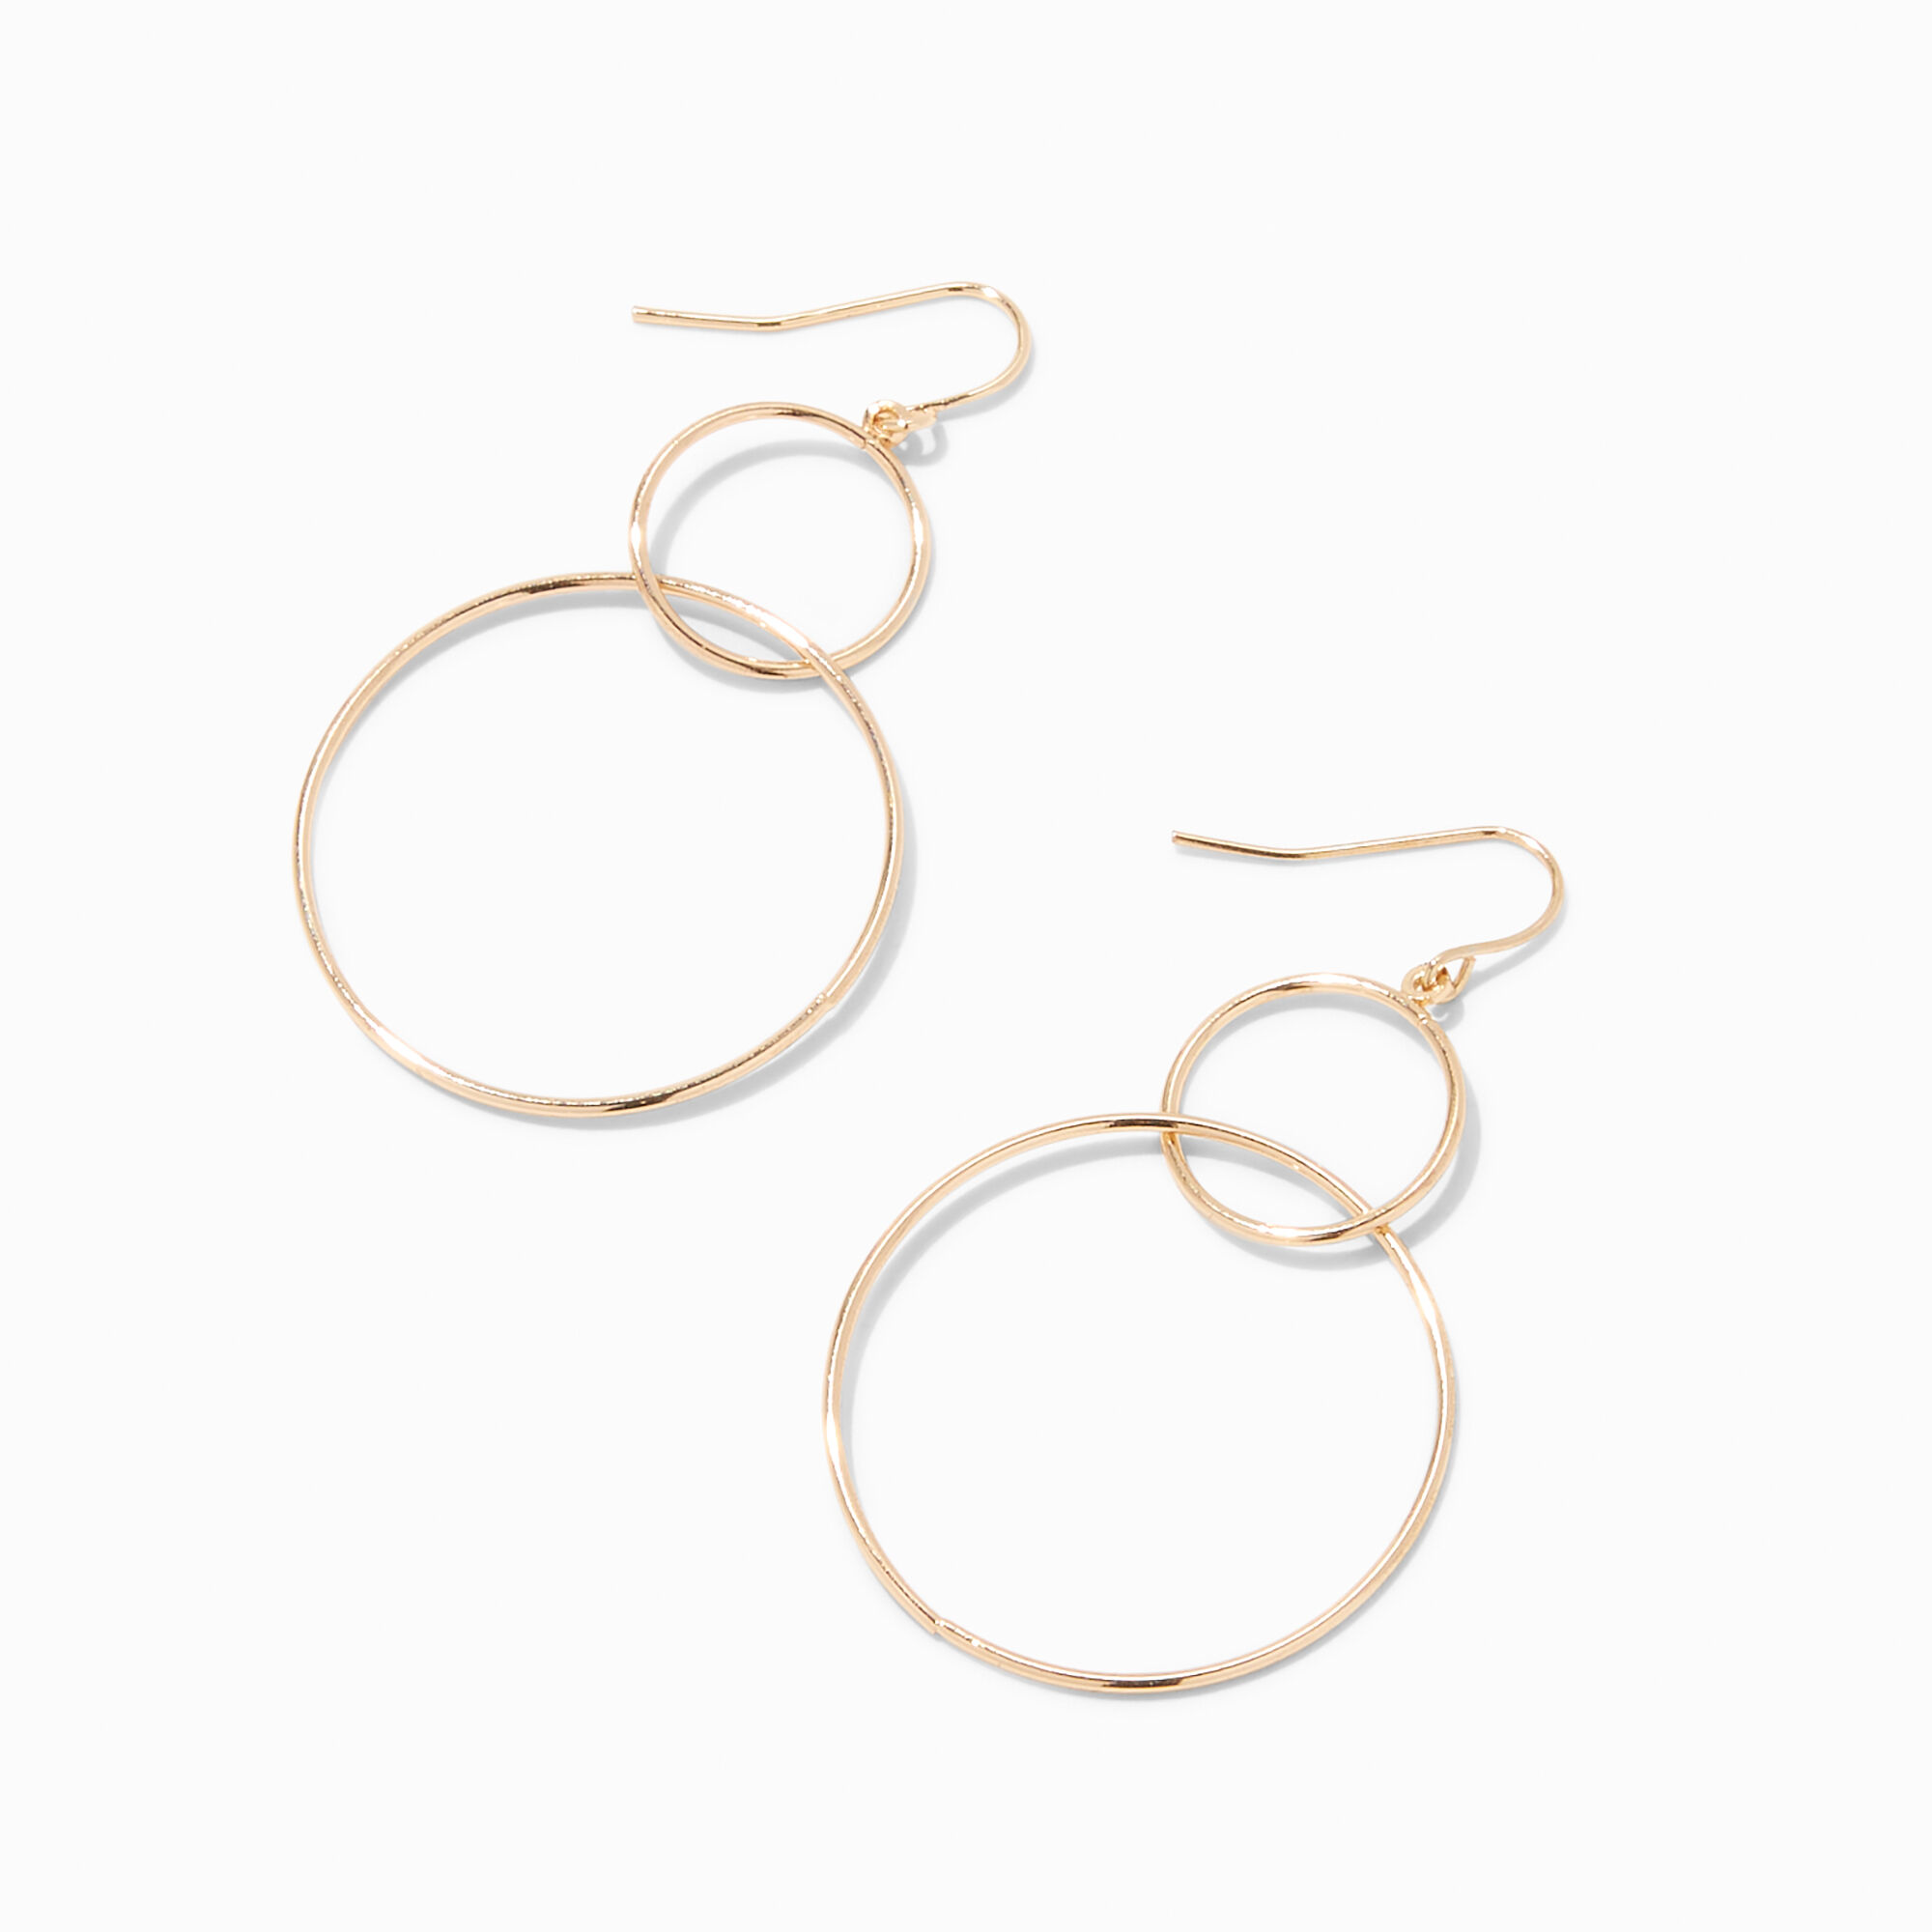 View Claires Tone 2 Wire Circle Drop Earrings Gold information